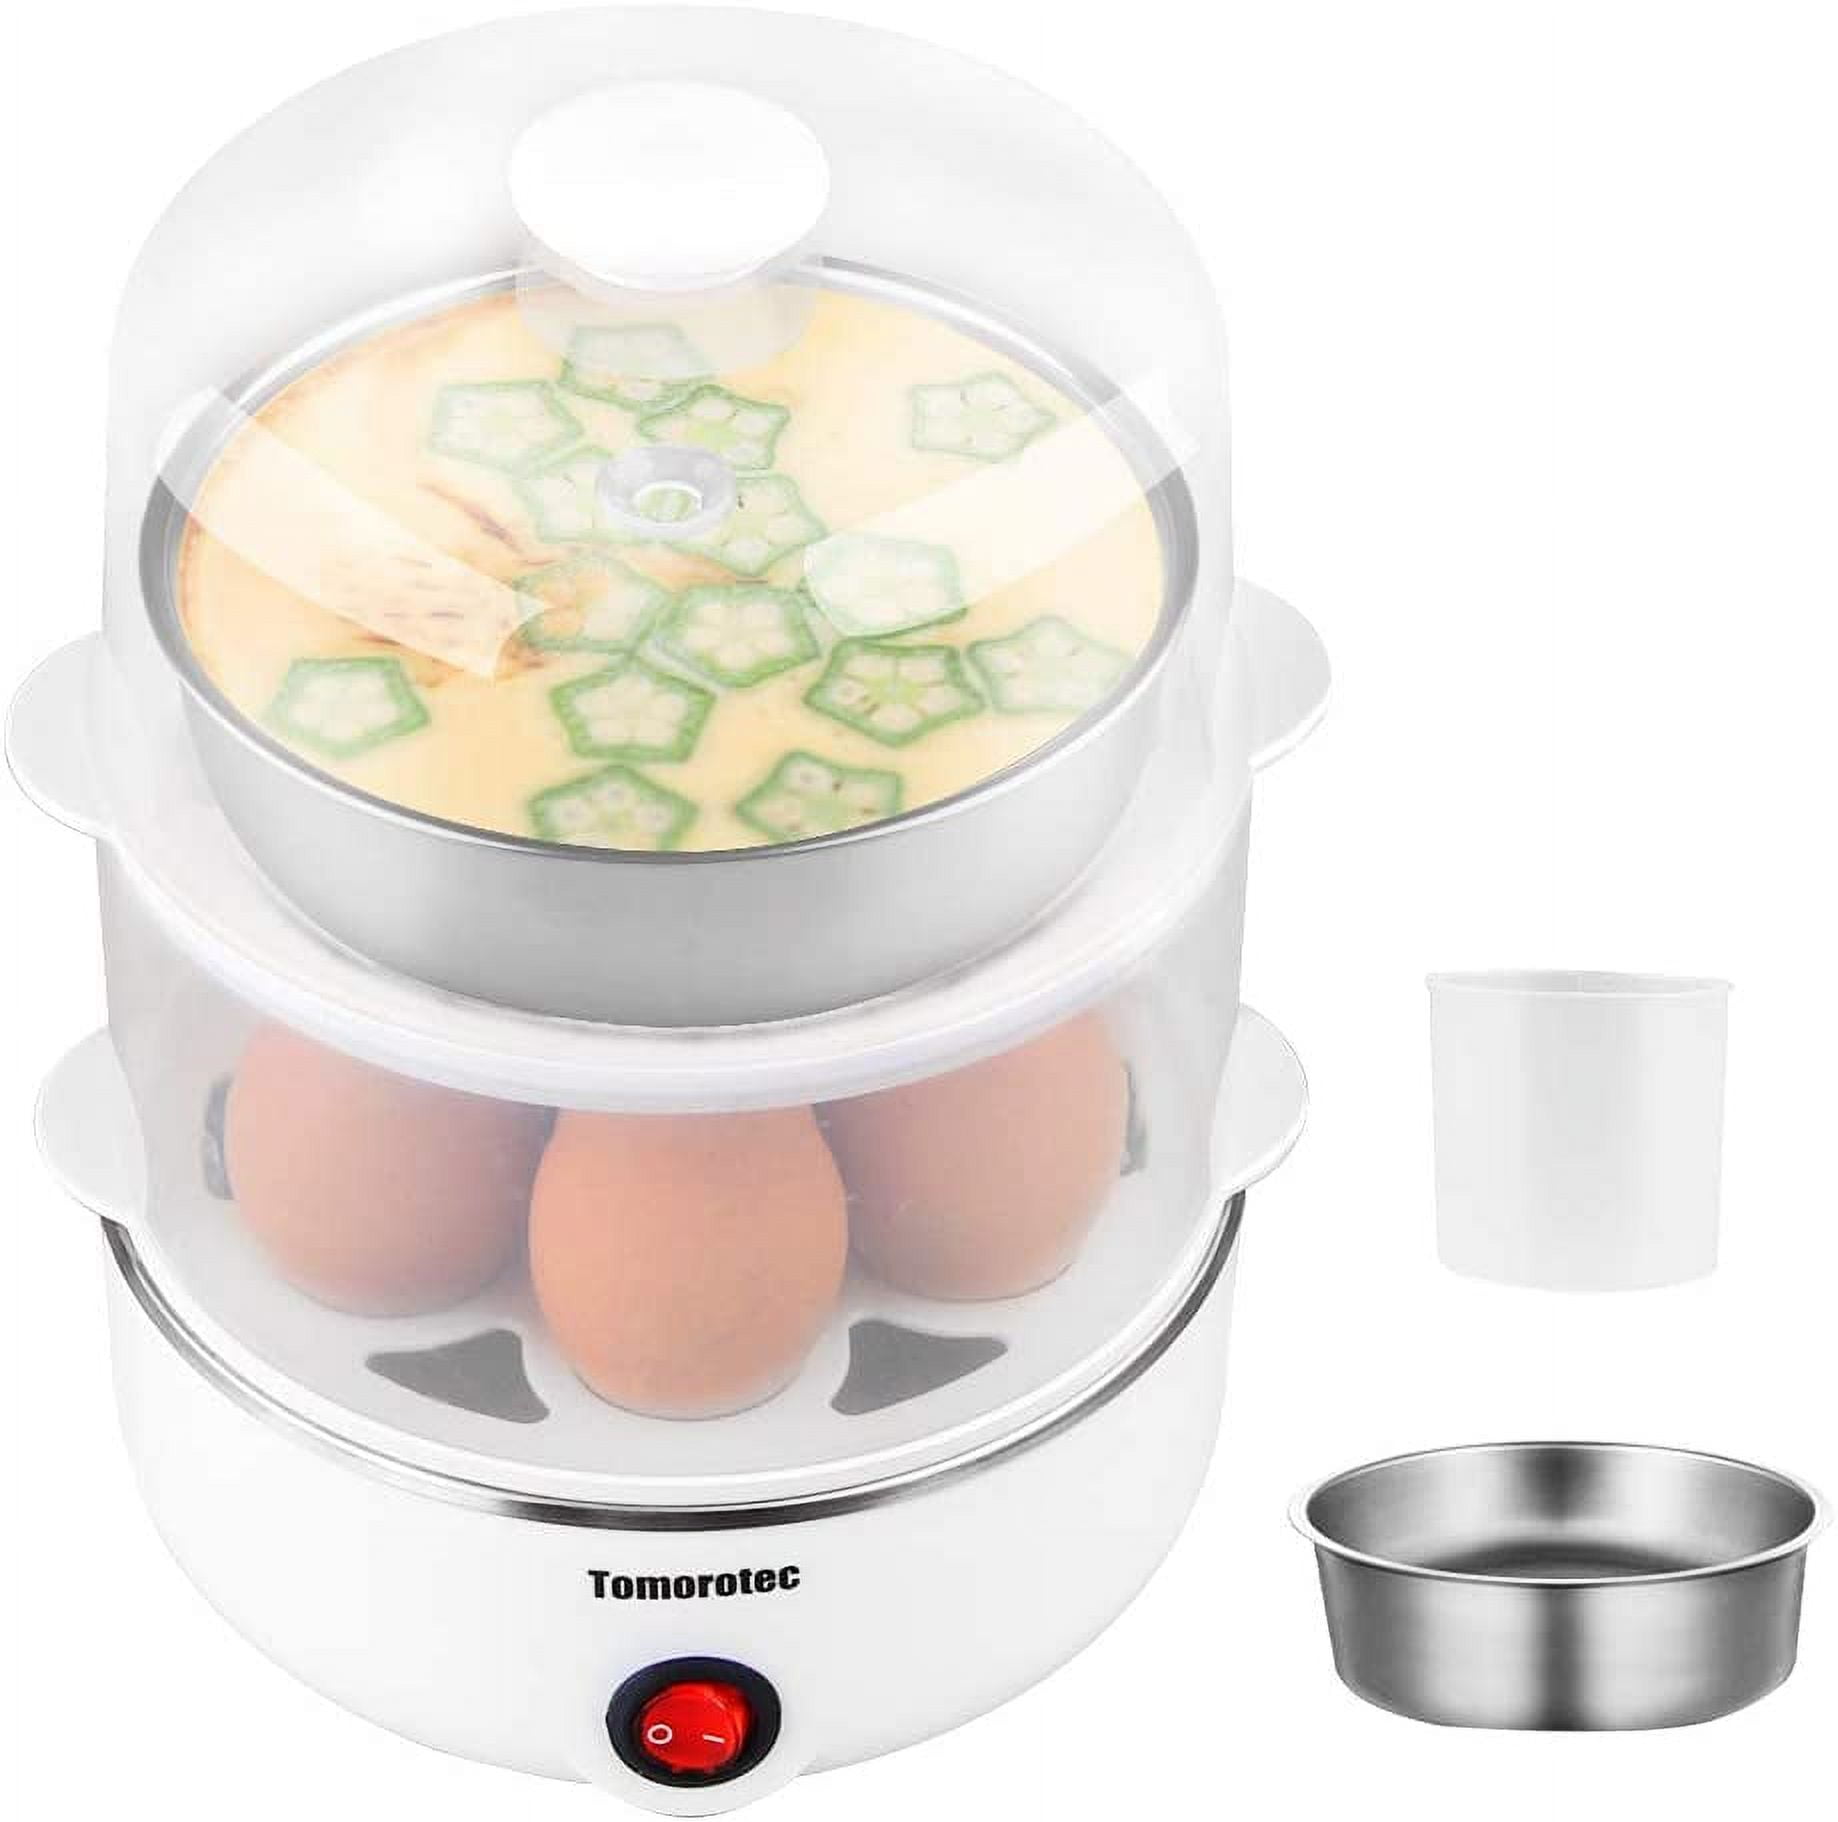 Electric 14-Egg Cooker, famous on Tik-Tok, is just $23